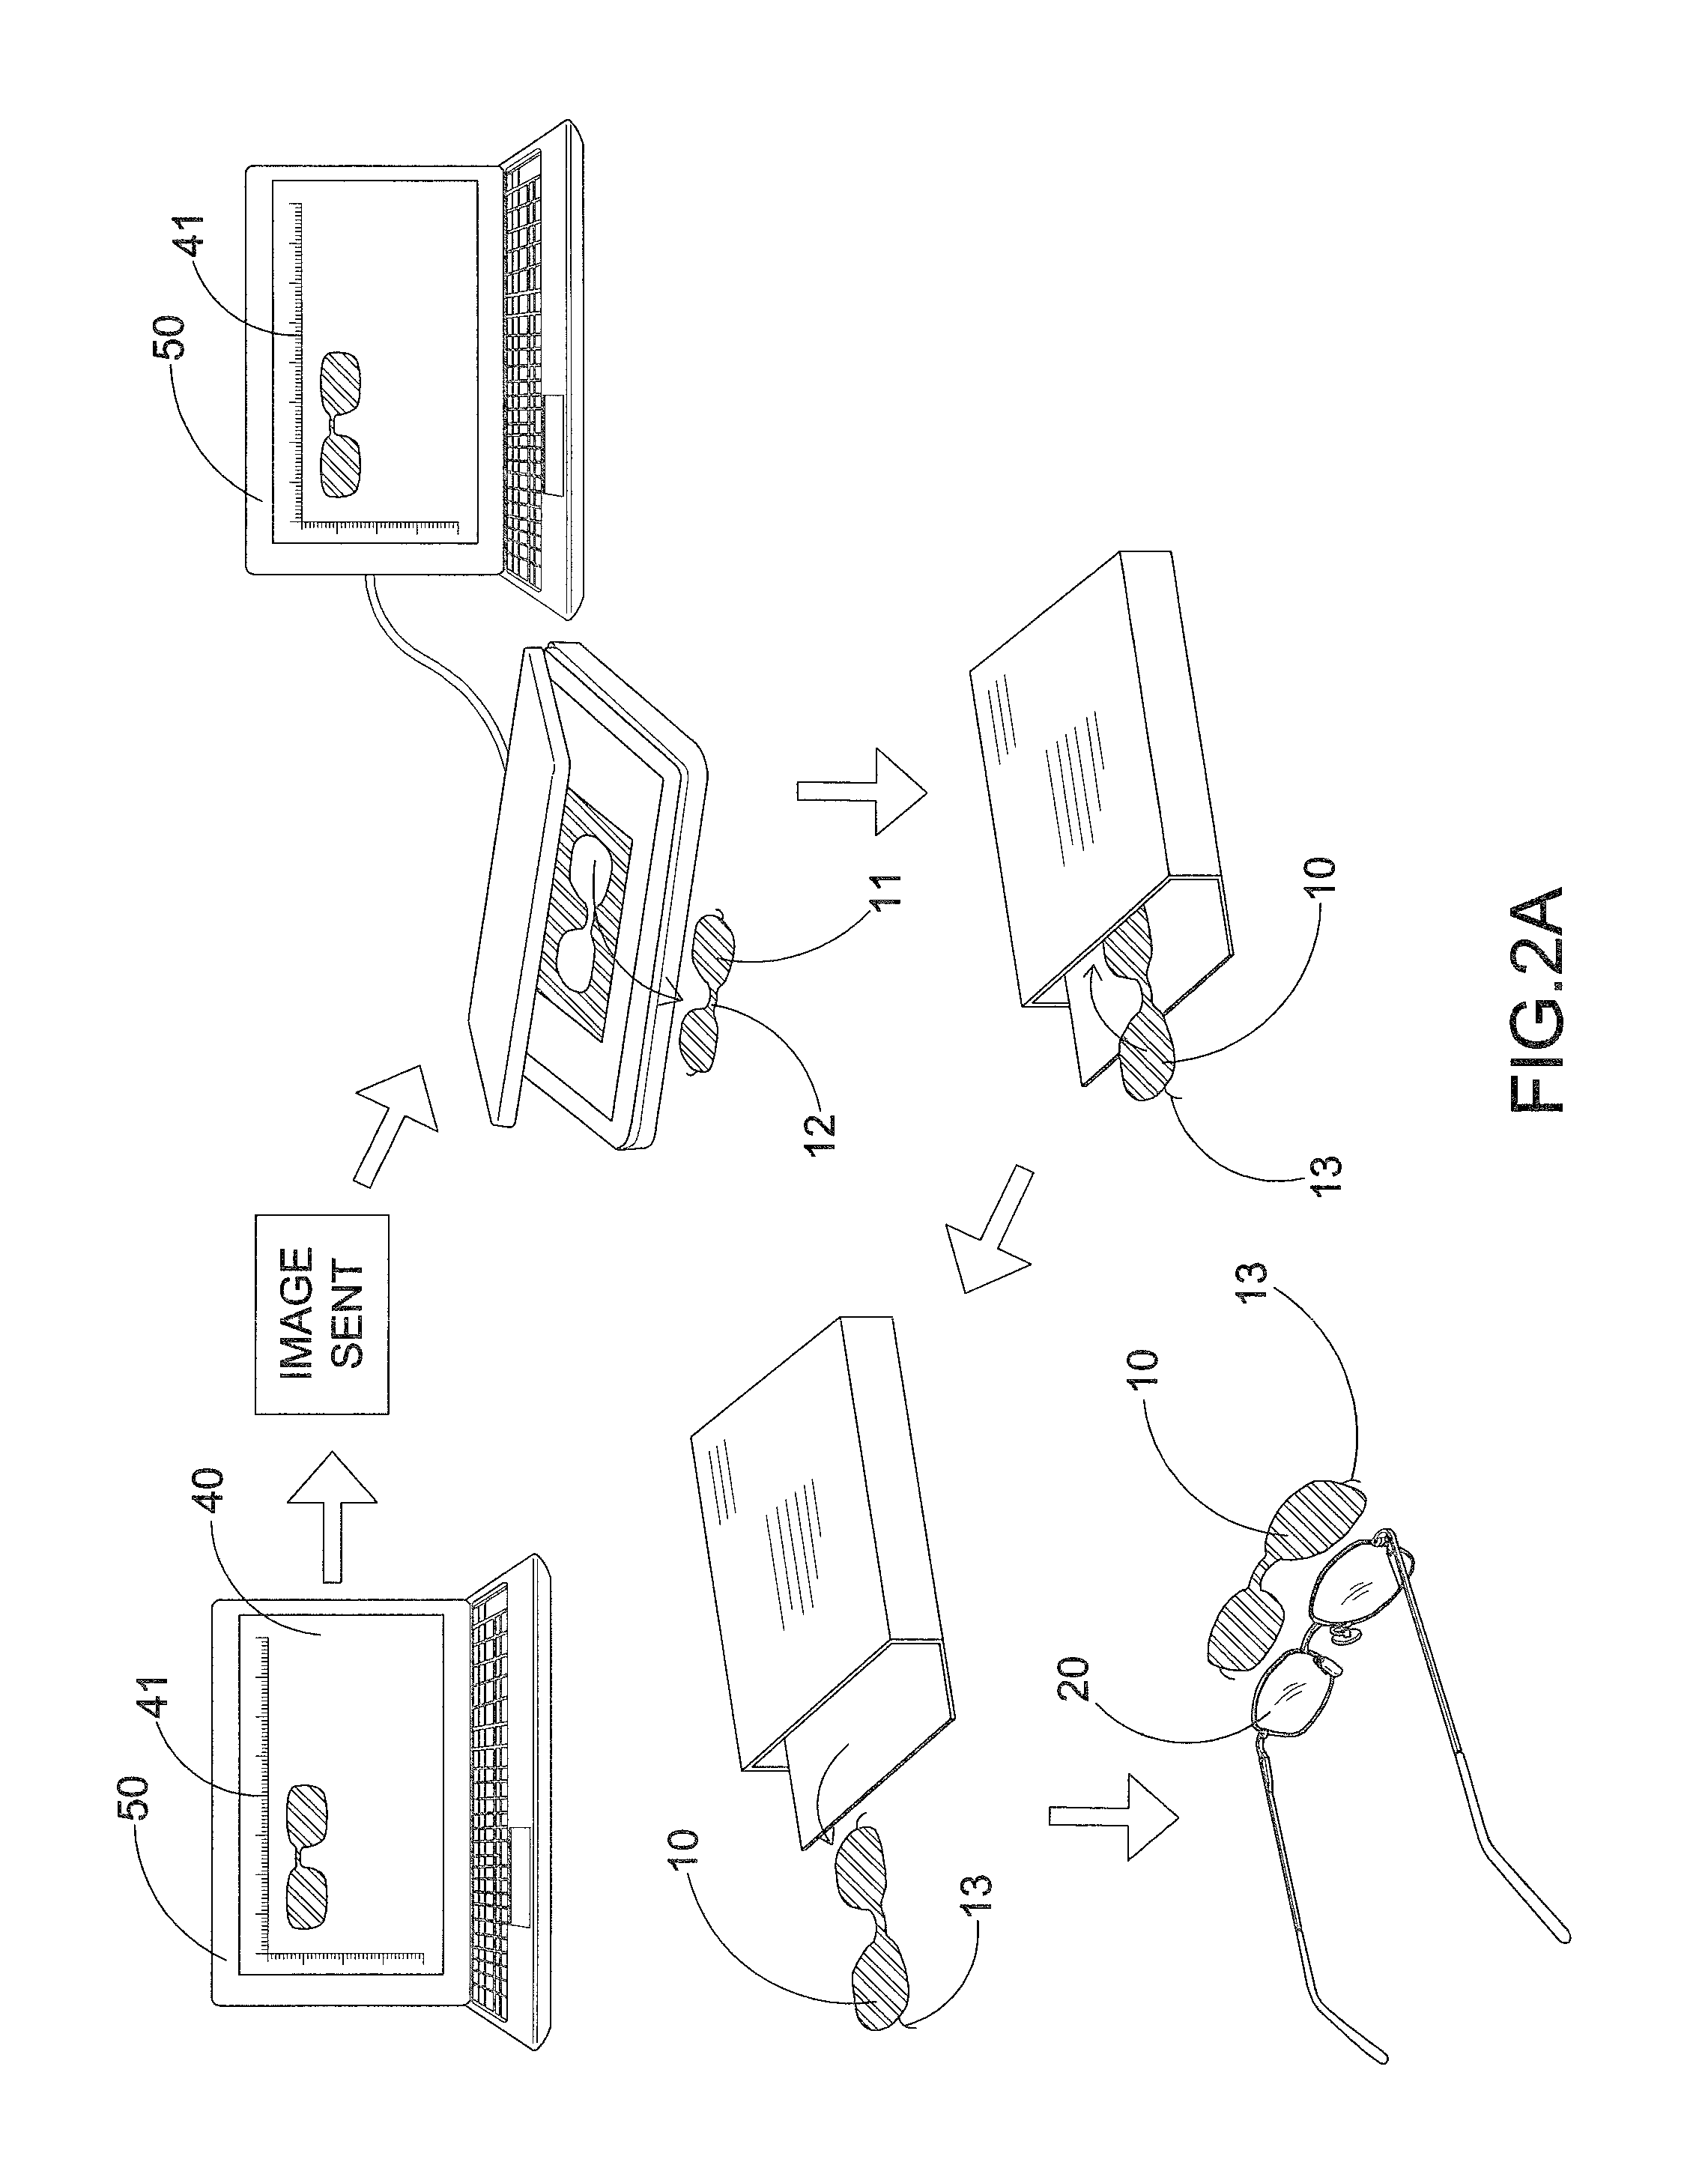 Method and System for Making Up Spectacles and Eyesight Testing through Public Network